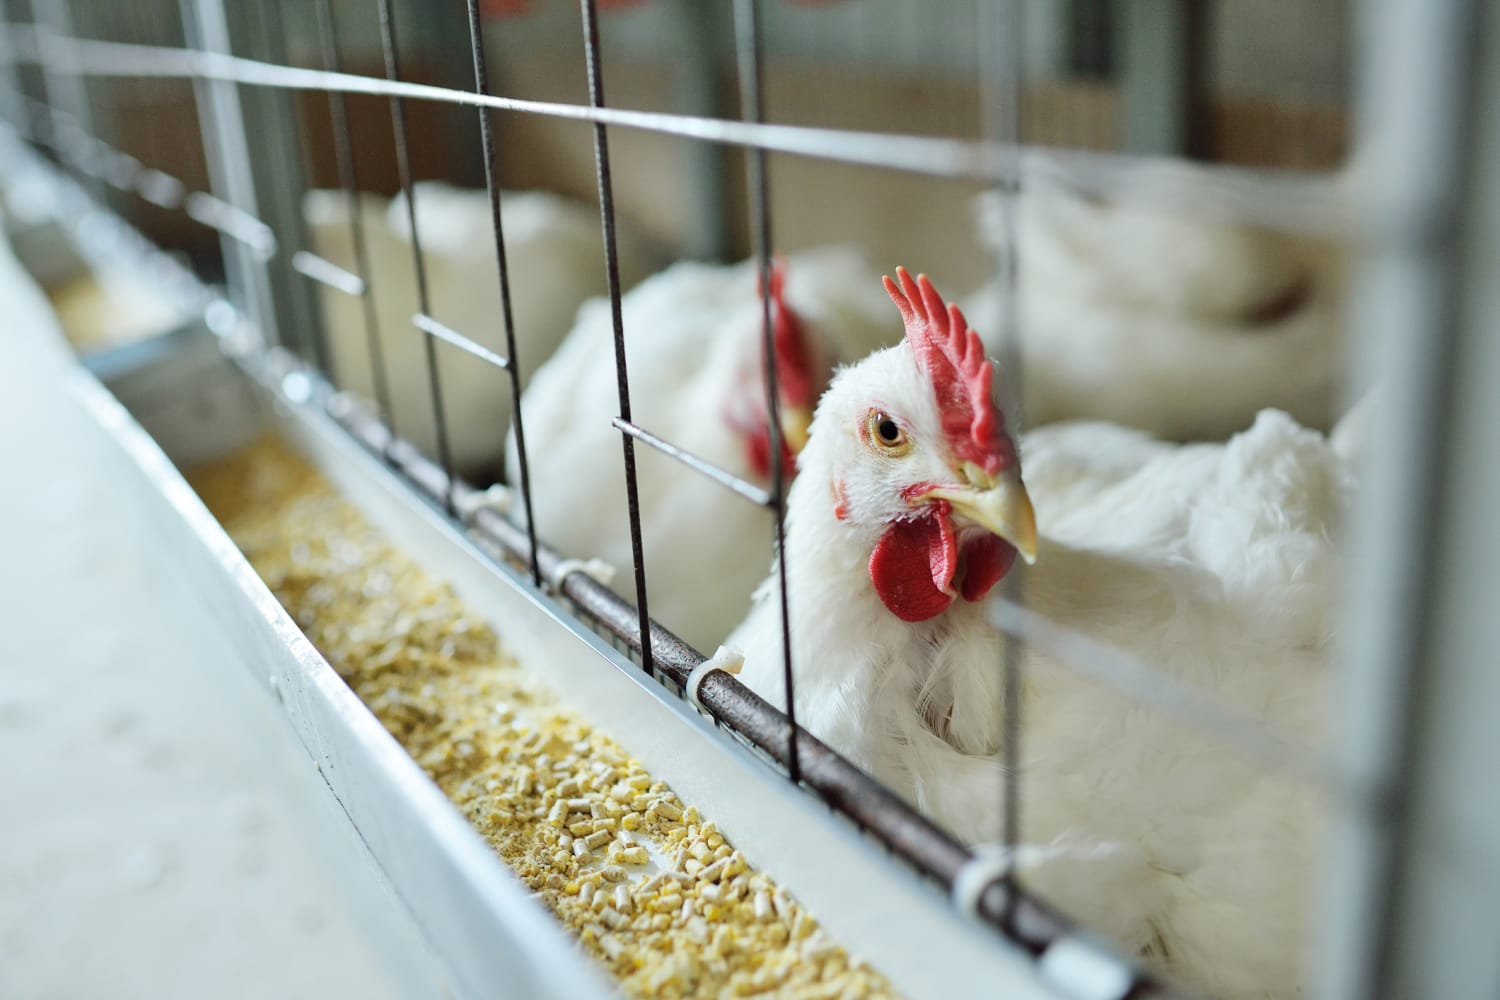 Michigan Farmworker Diagnosed with Bird Flu, 2nd Human Case Confirmed in the U.S.